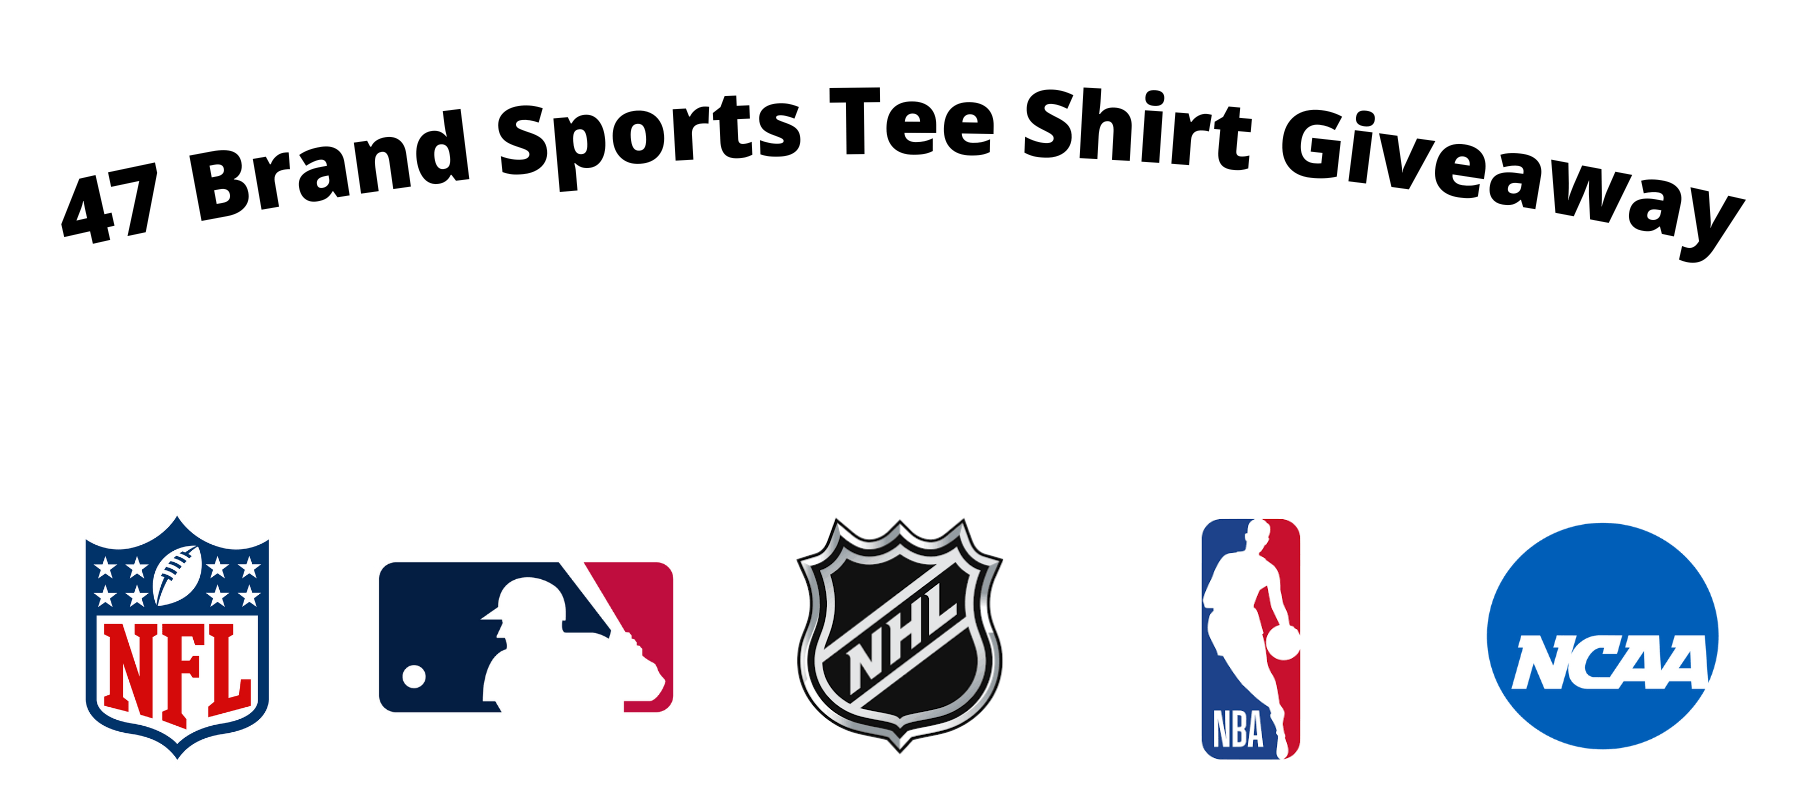 Global Pursuit 47 Brand Sports T-Shirt Giveaway Round 2!